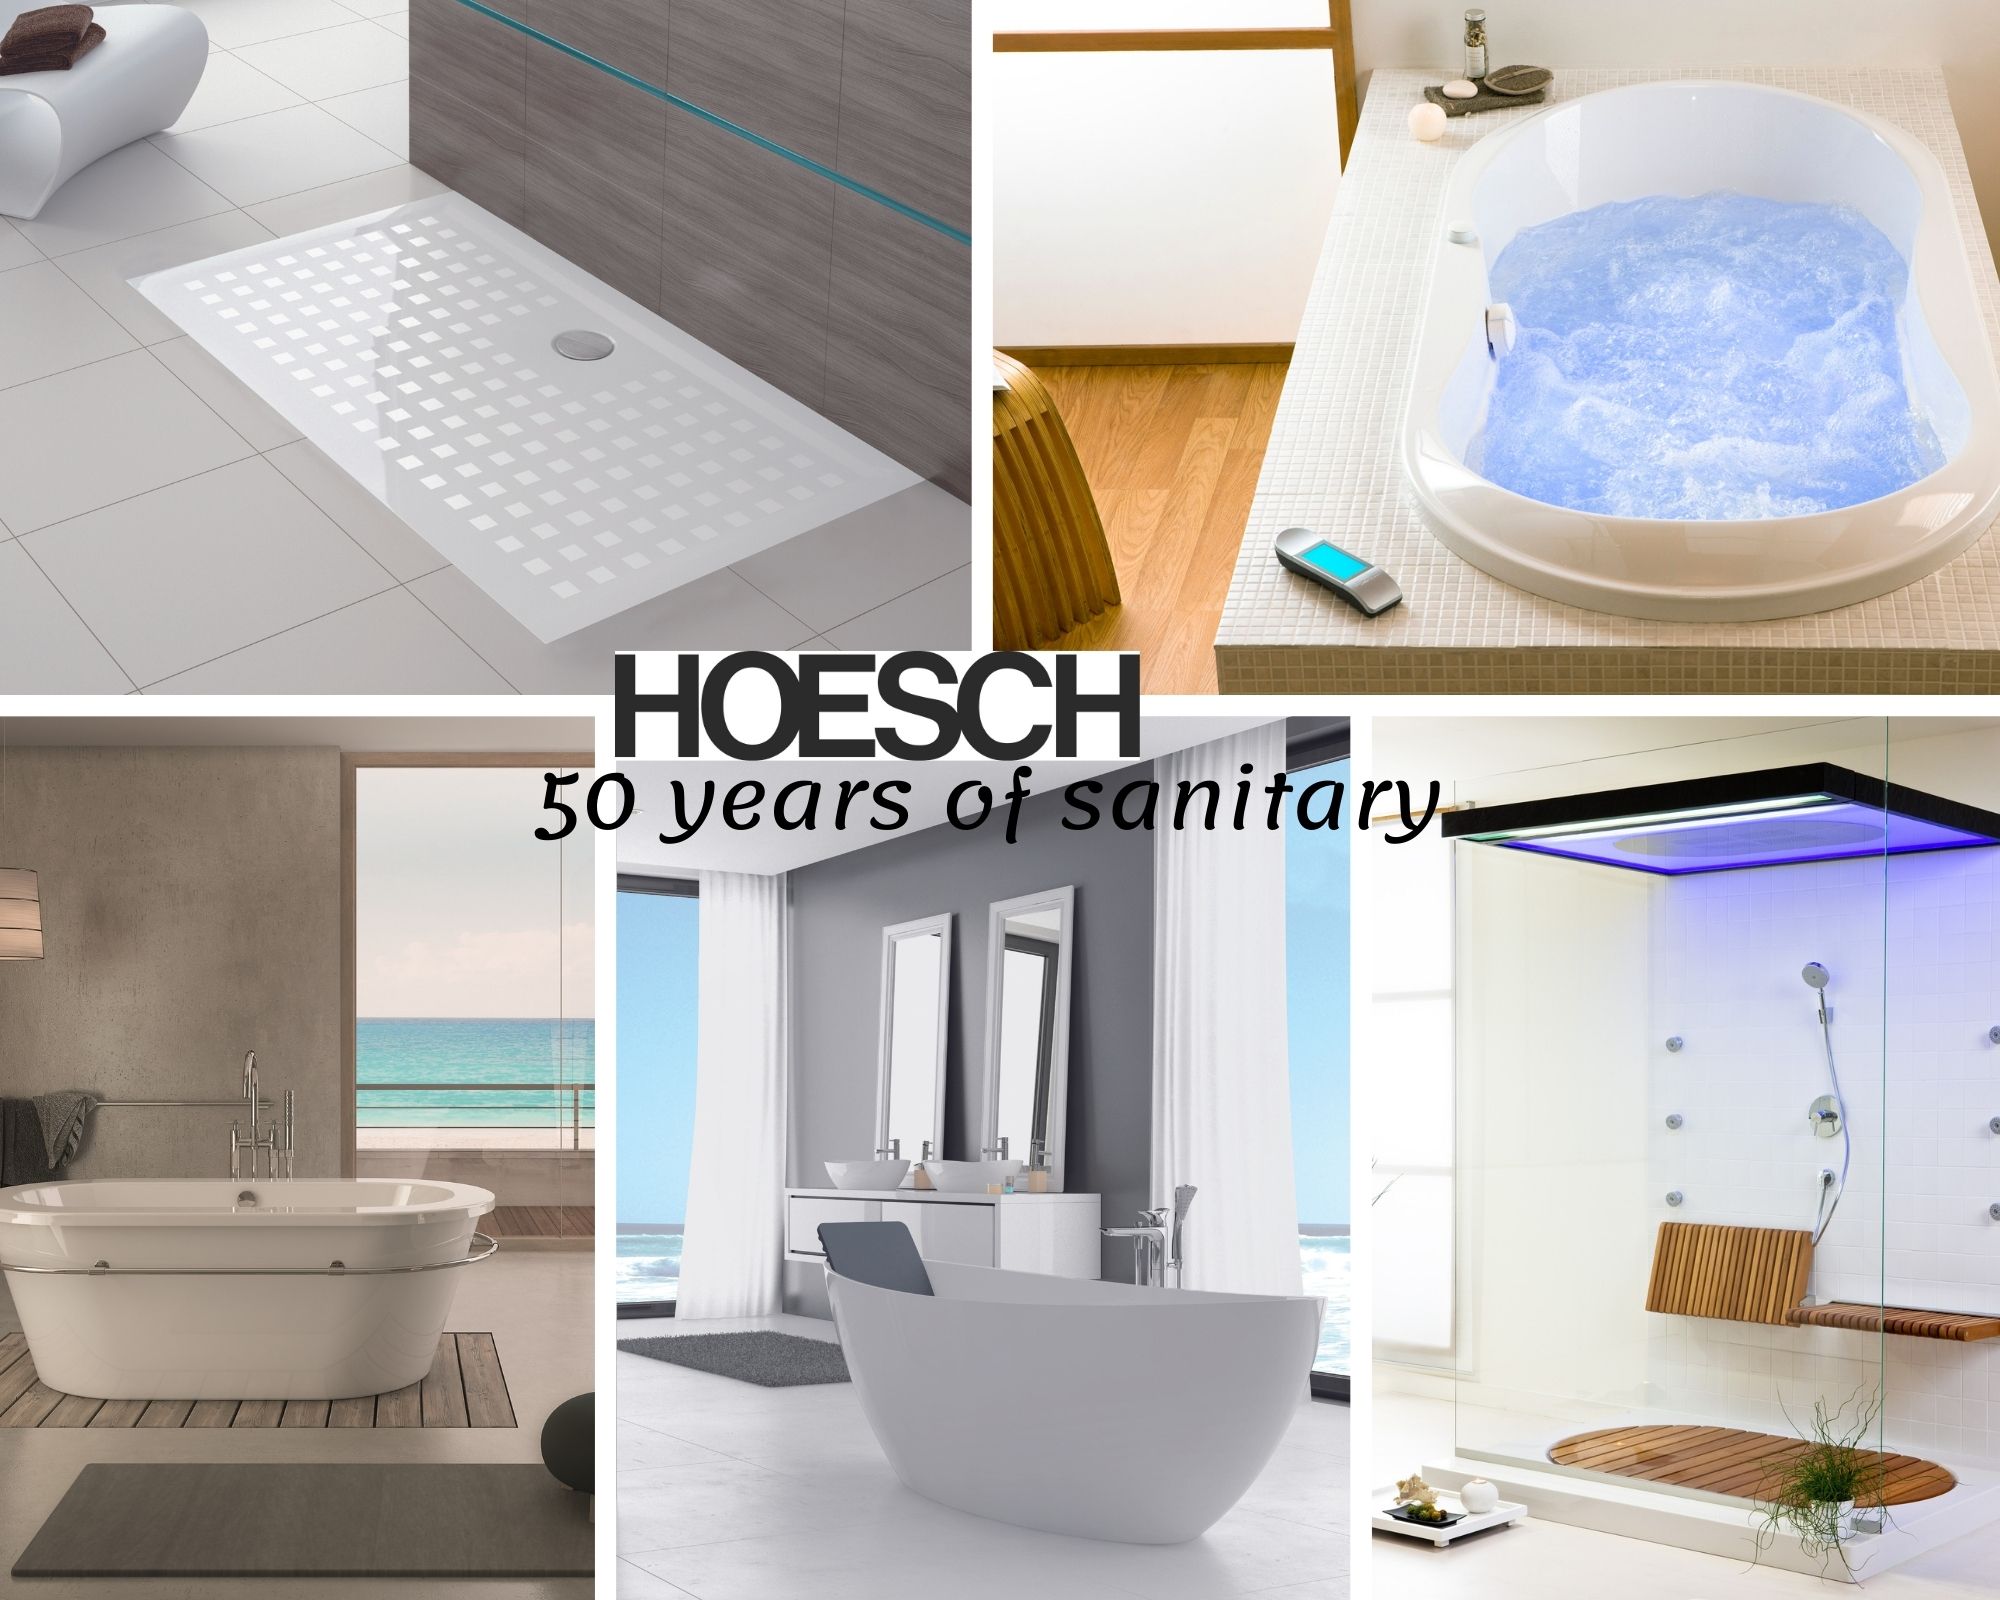 HOESCH has been creating beauty from acrylic for half a century!